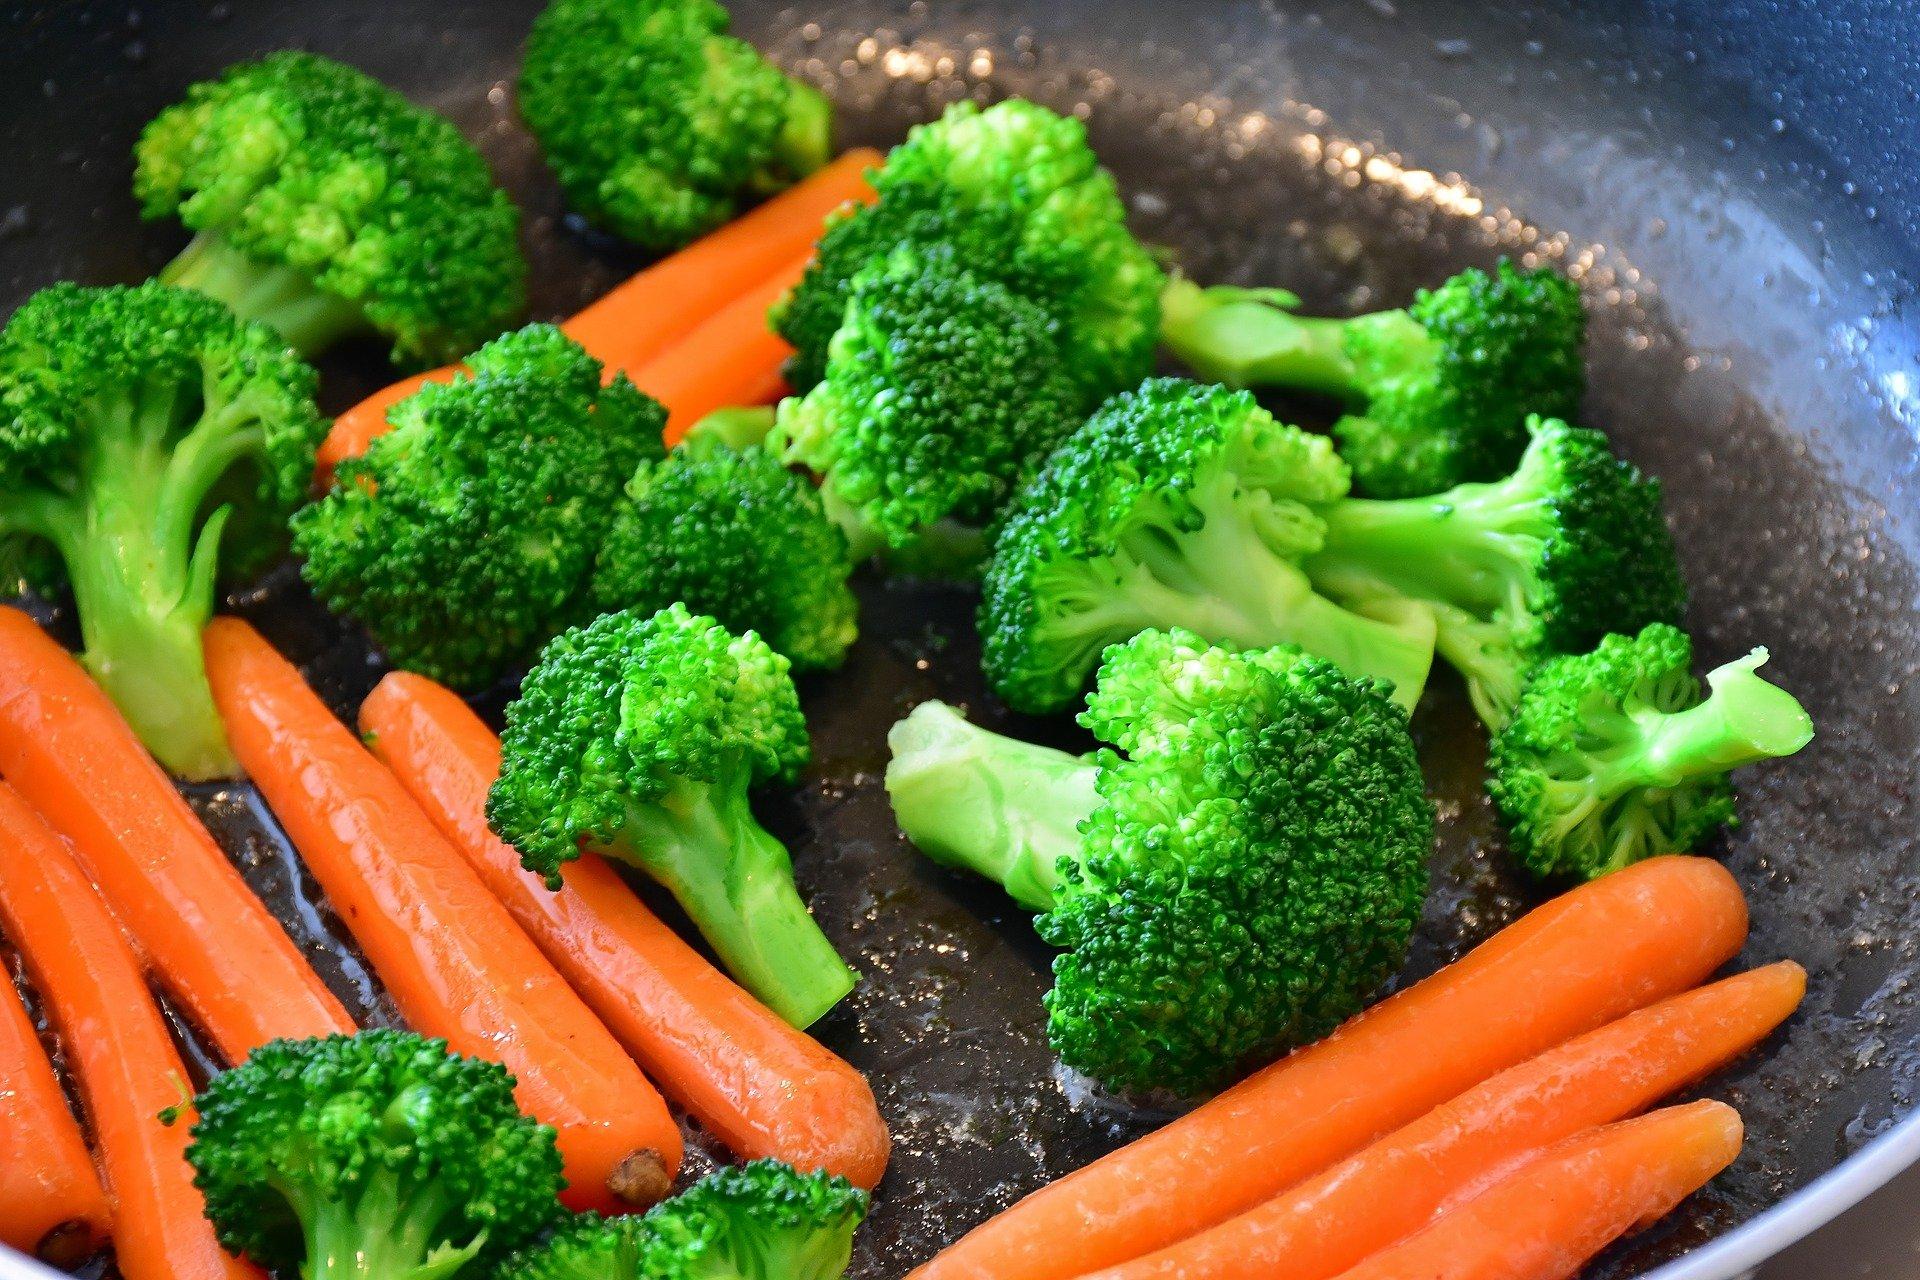 benefits of plant foods-carrots and broccoli in frypan